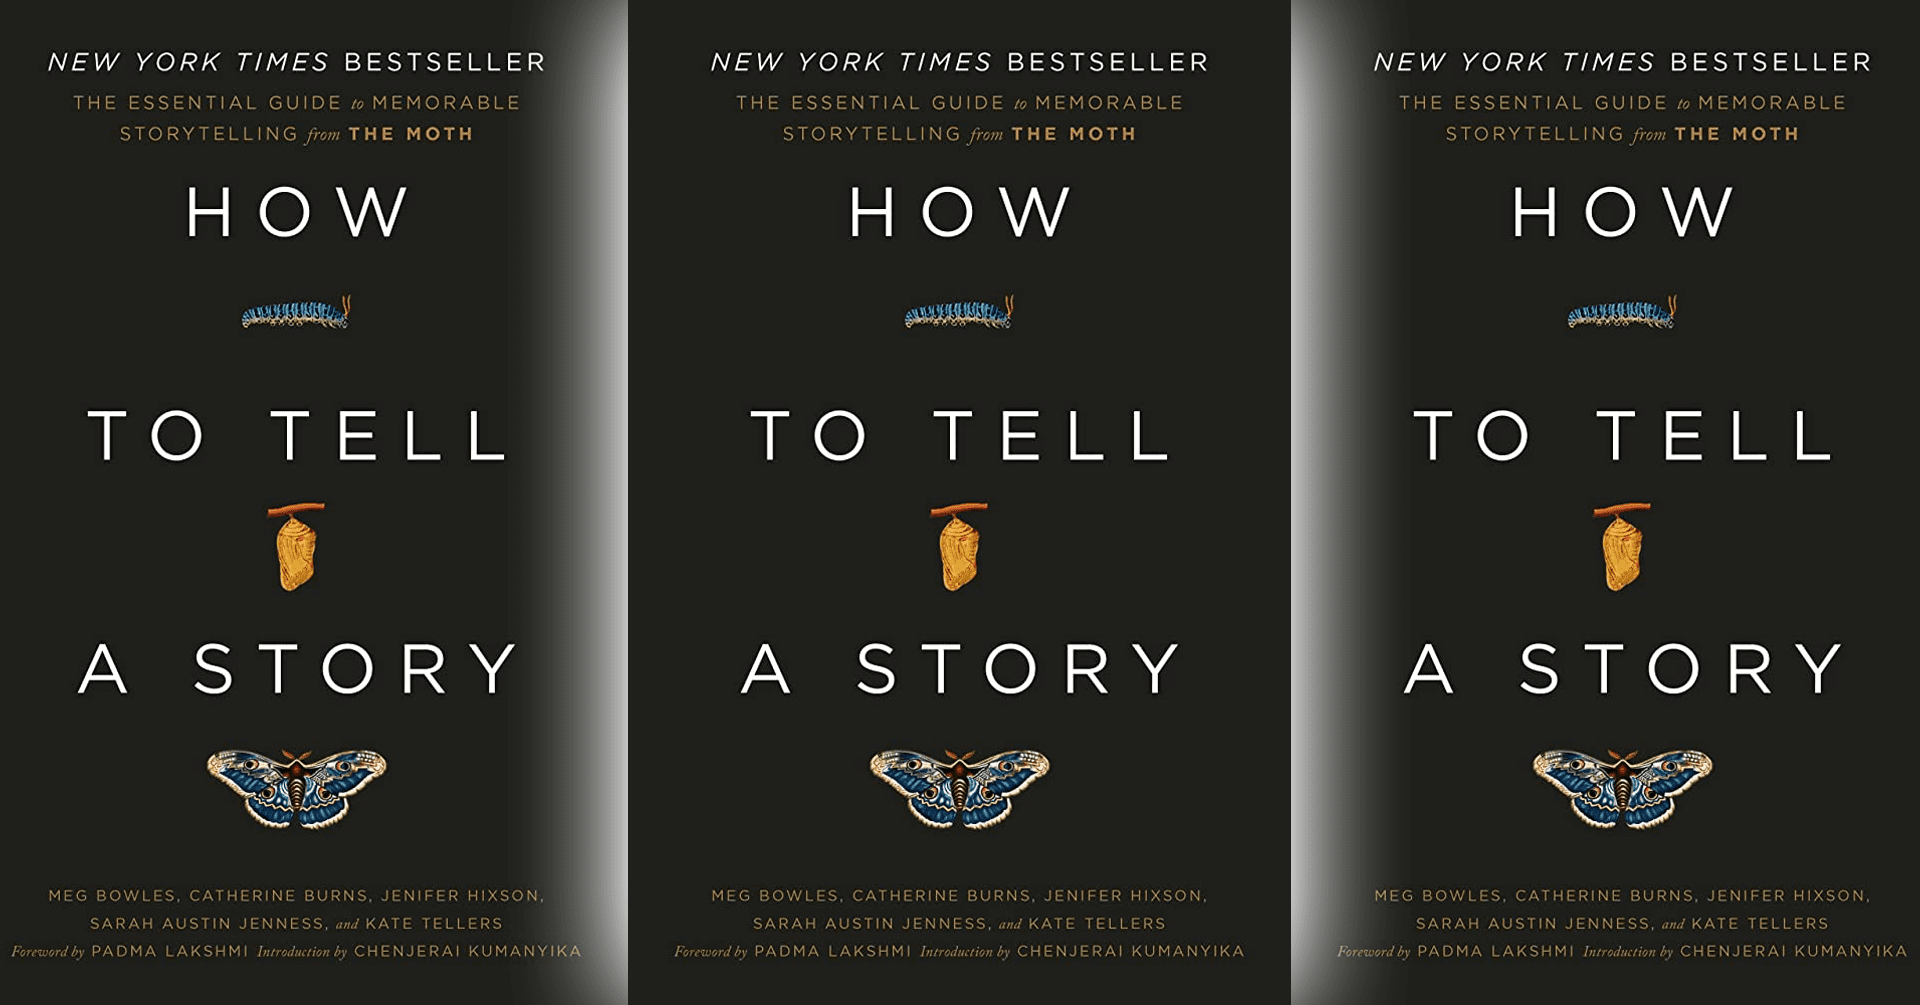 "How to Tell a Story" by Kate Tellers (book cover)